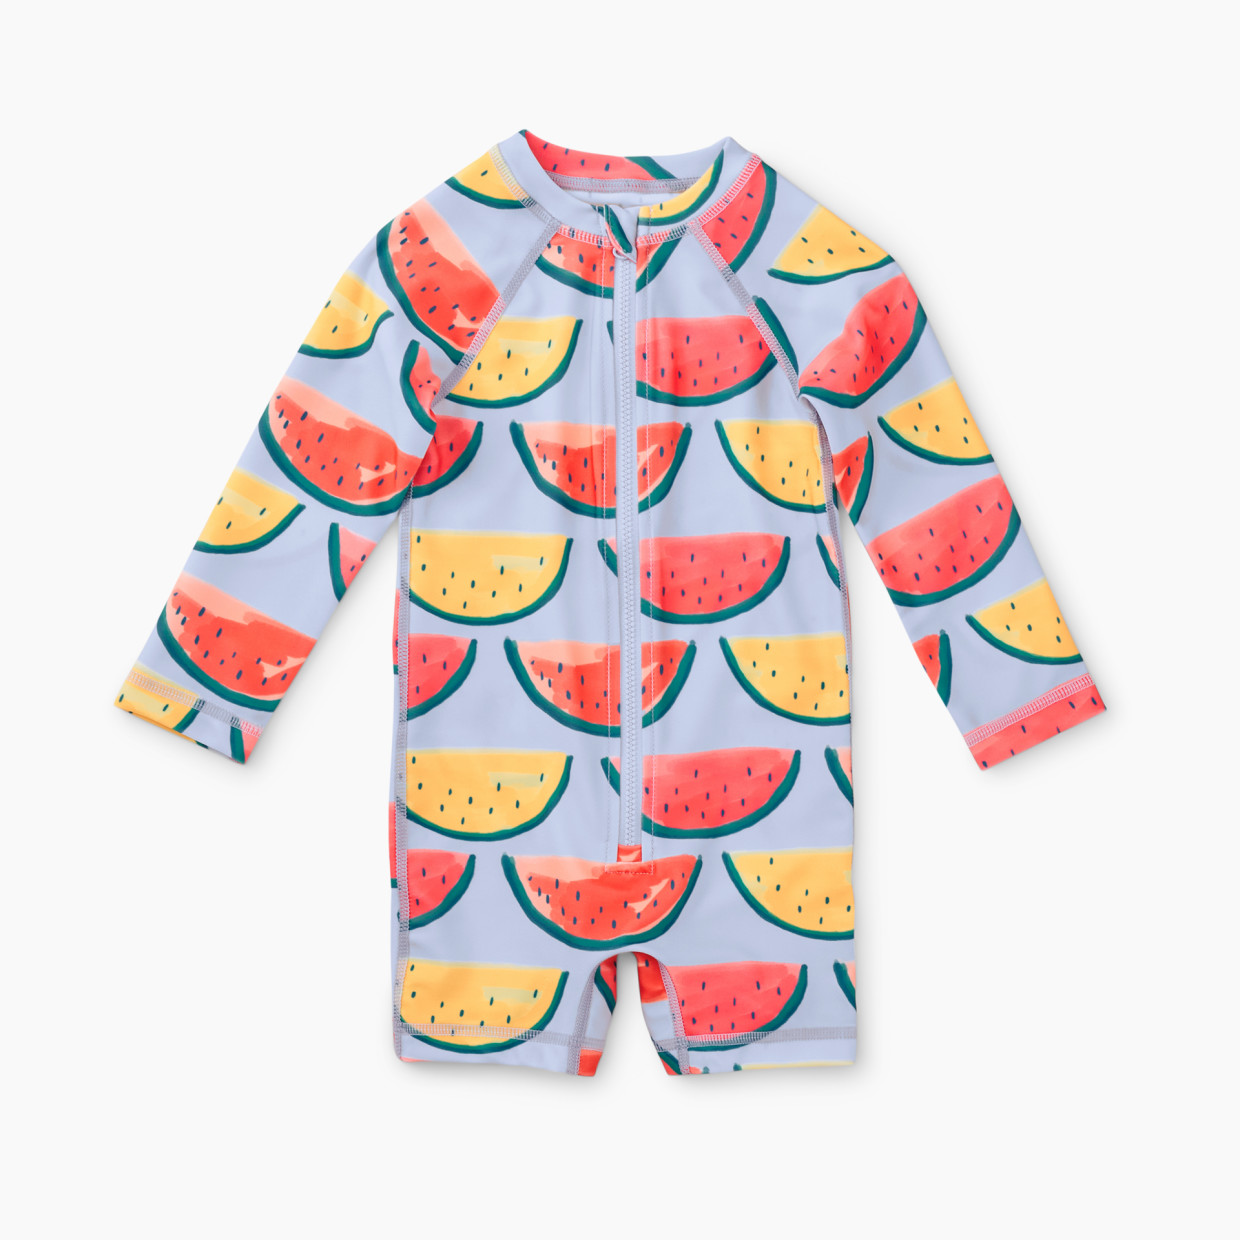 Tea Collection Rash Guard Baby Swimsuit - Painted Watermelons, 6-9 M ...